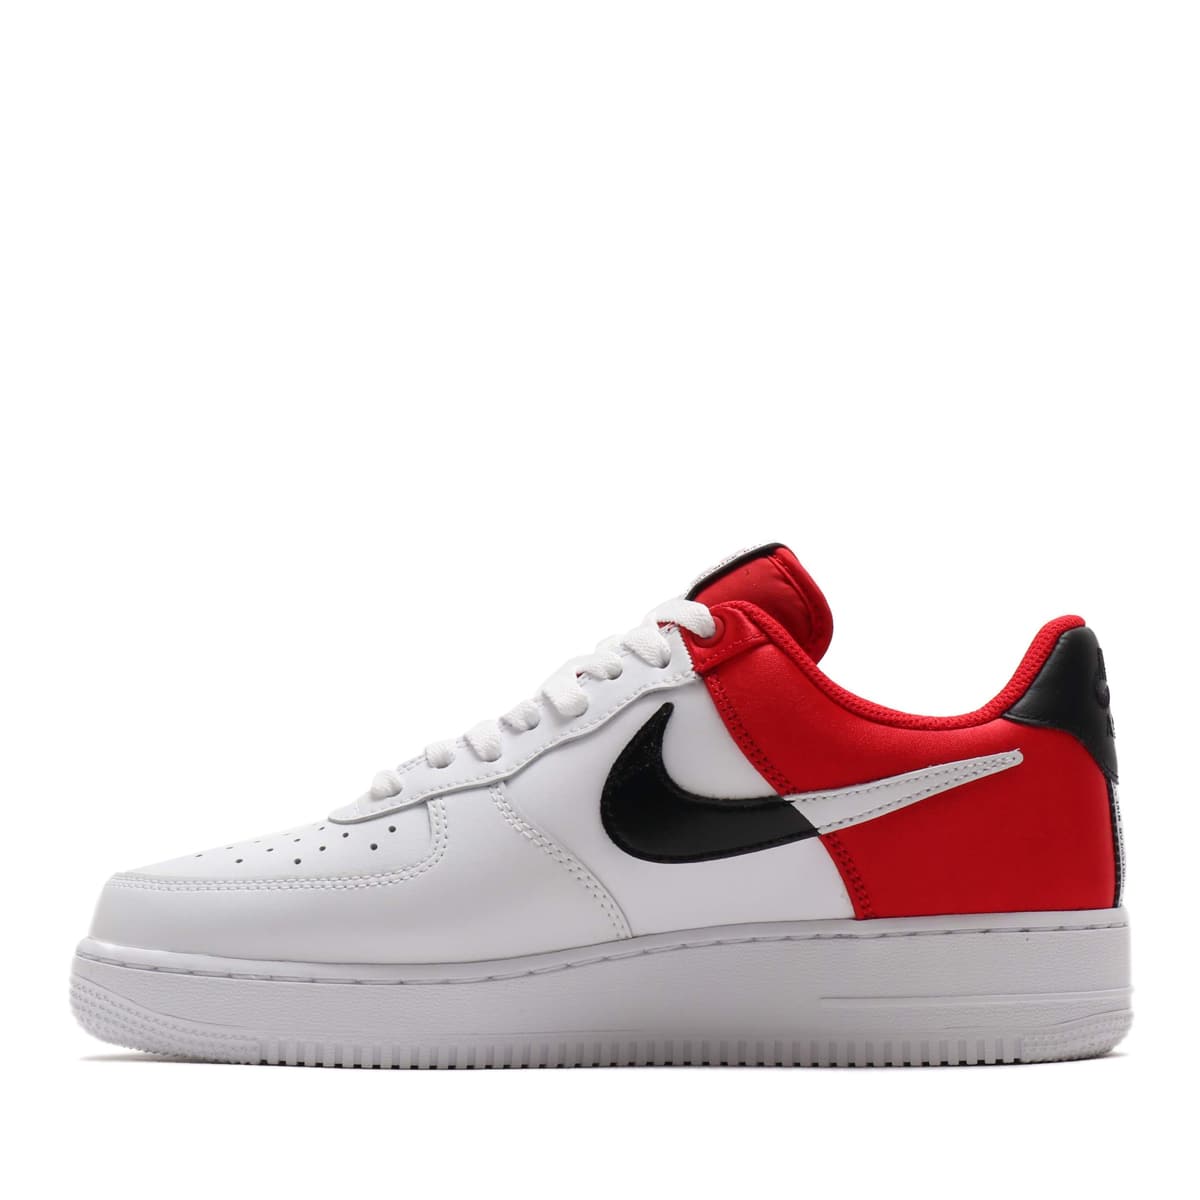 nike air force 1 07 lv8 university red white blue